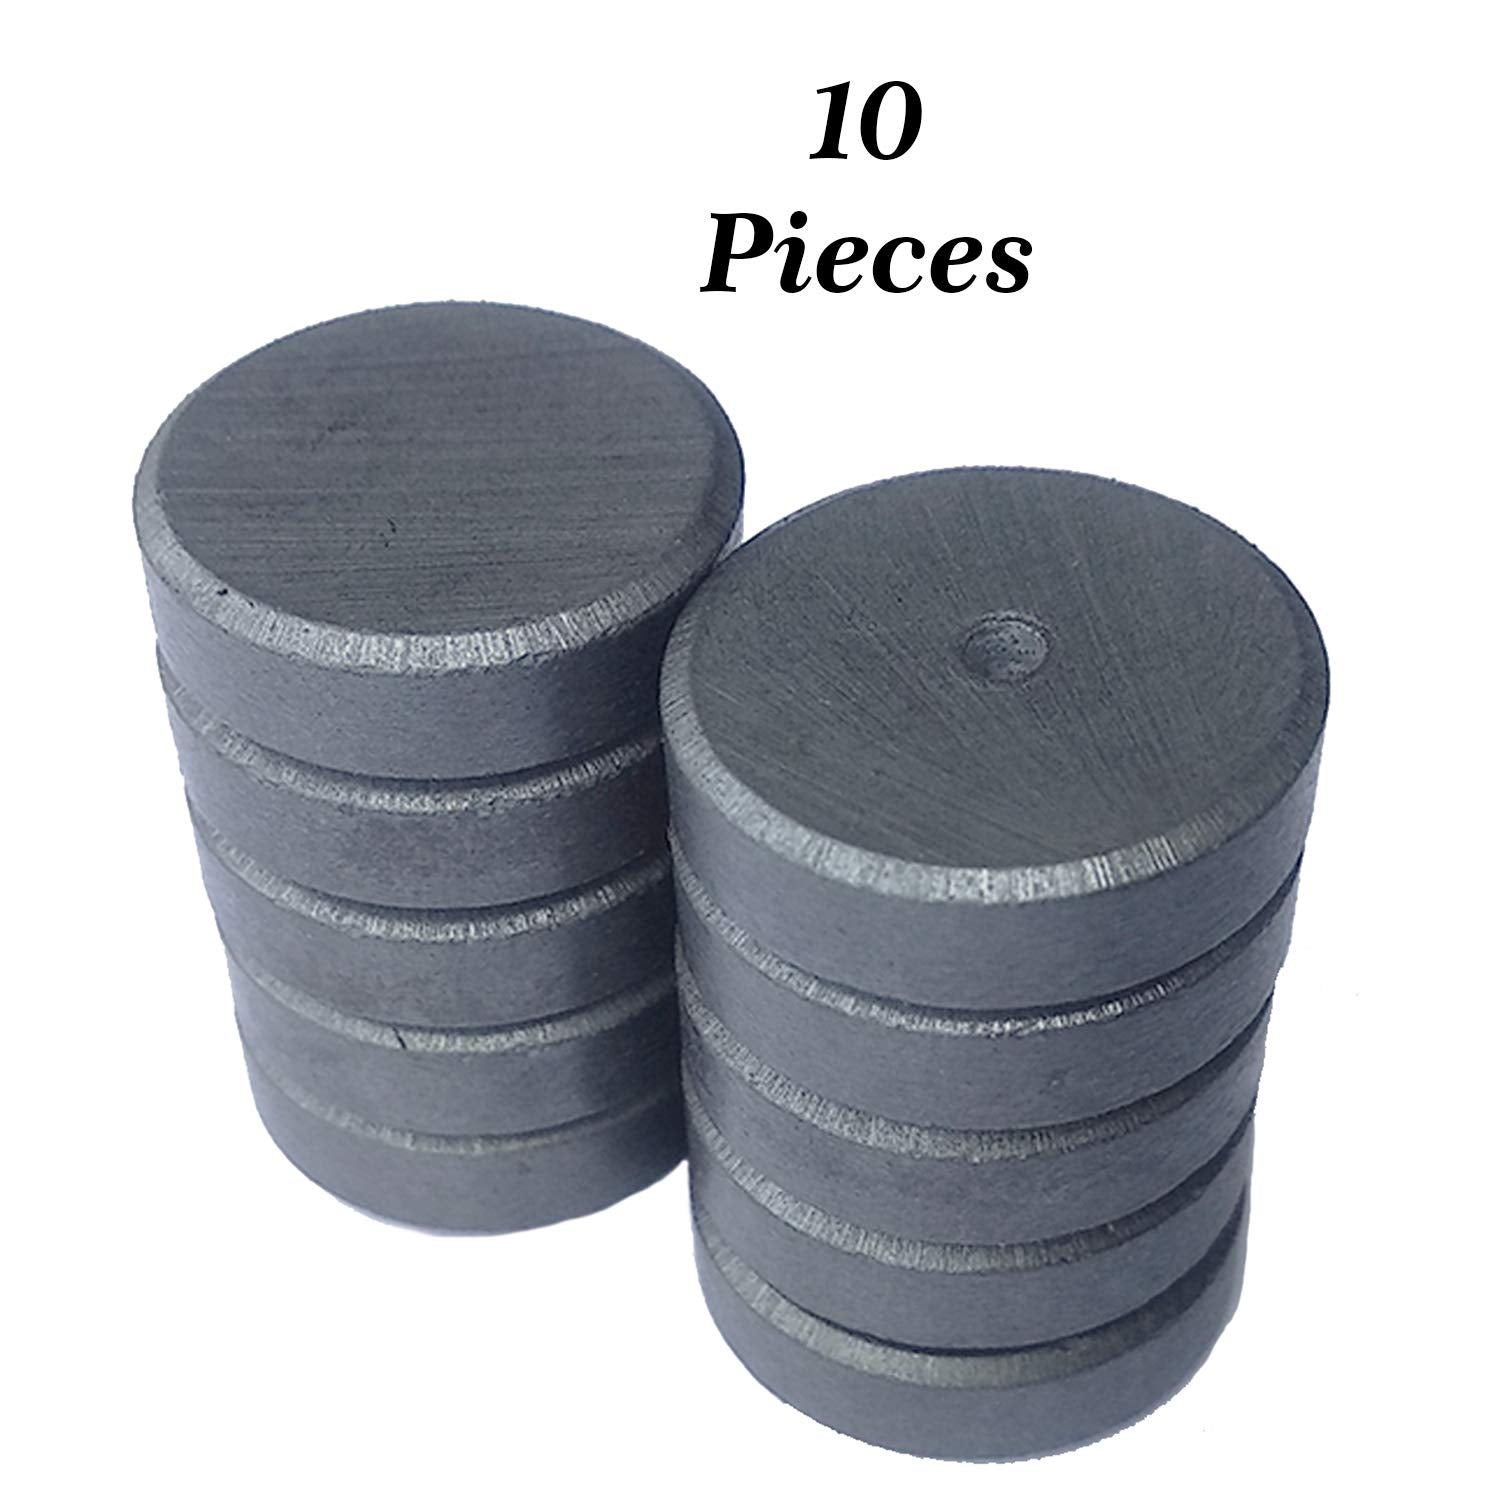 Powerful and Industrial 1 inch round magnets 